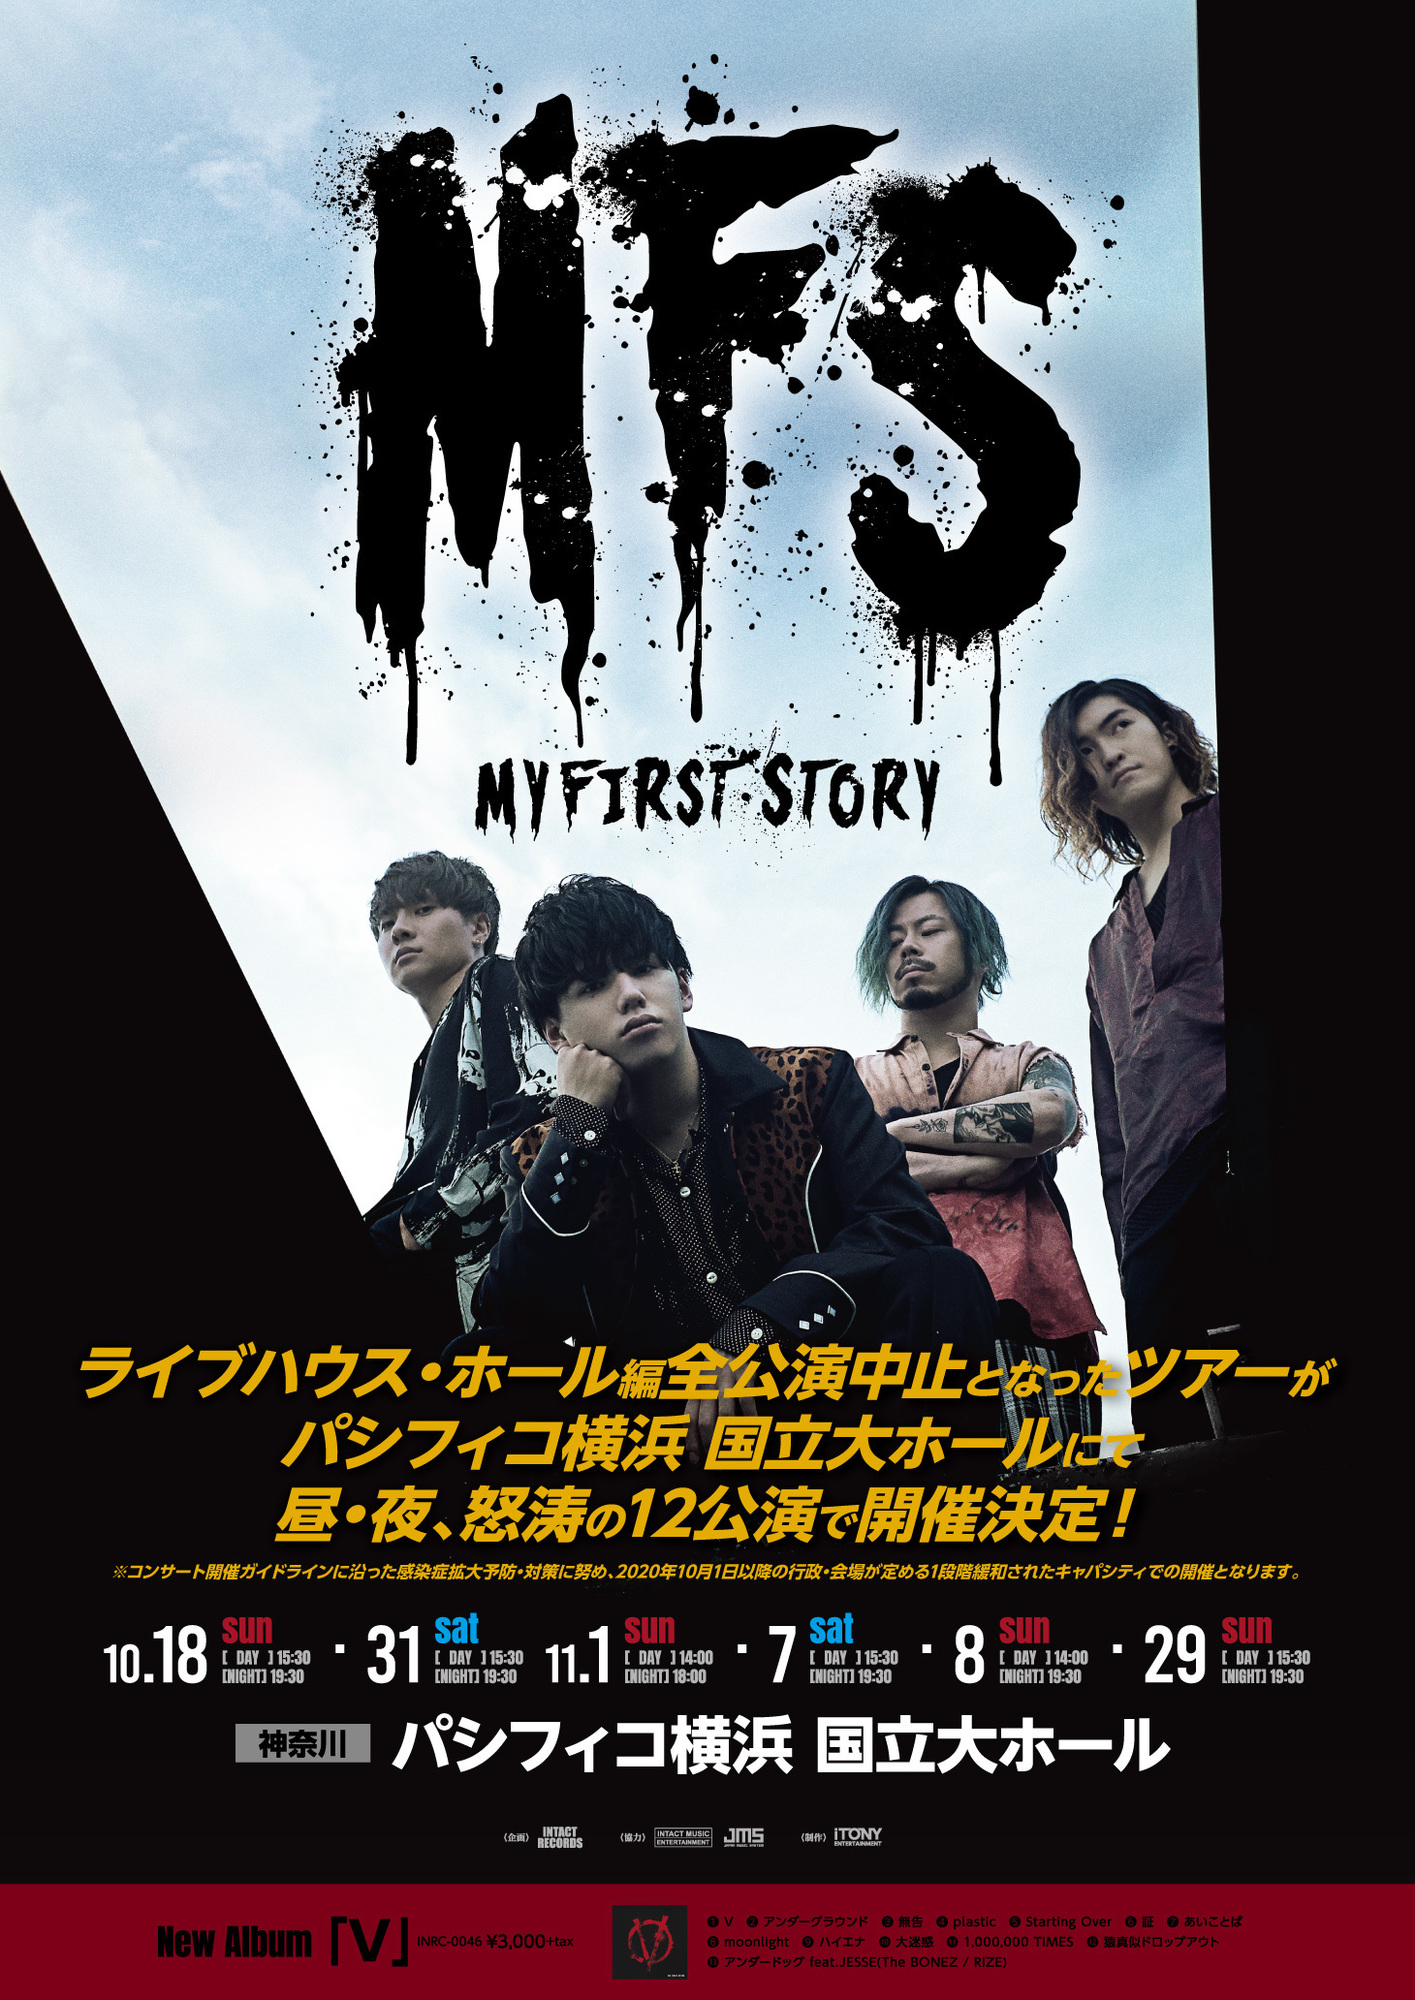 CDMY FIRST STORY マイファス　ピクチャーチケット　グッズ